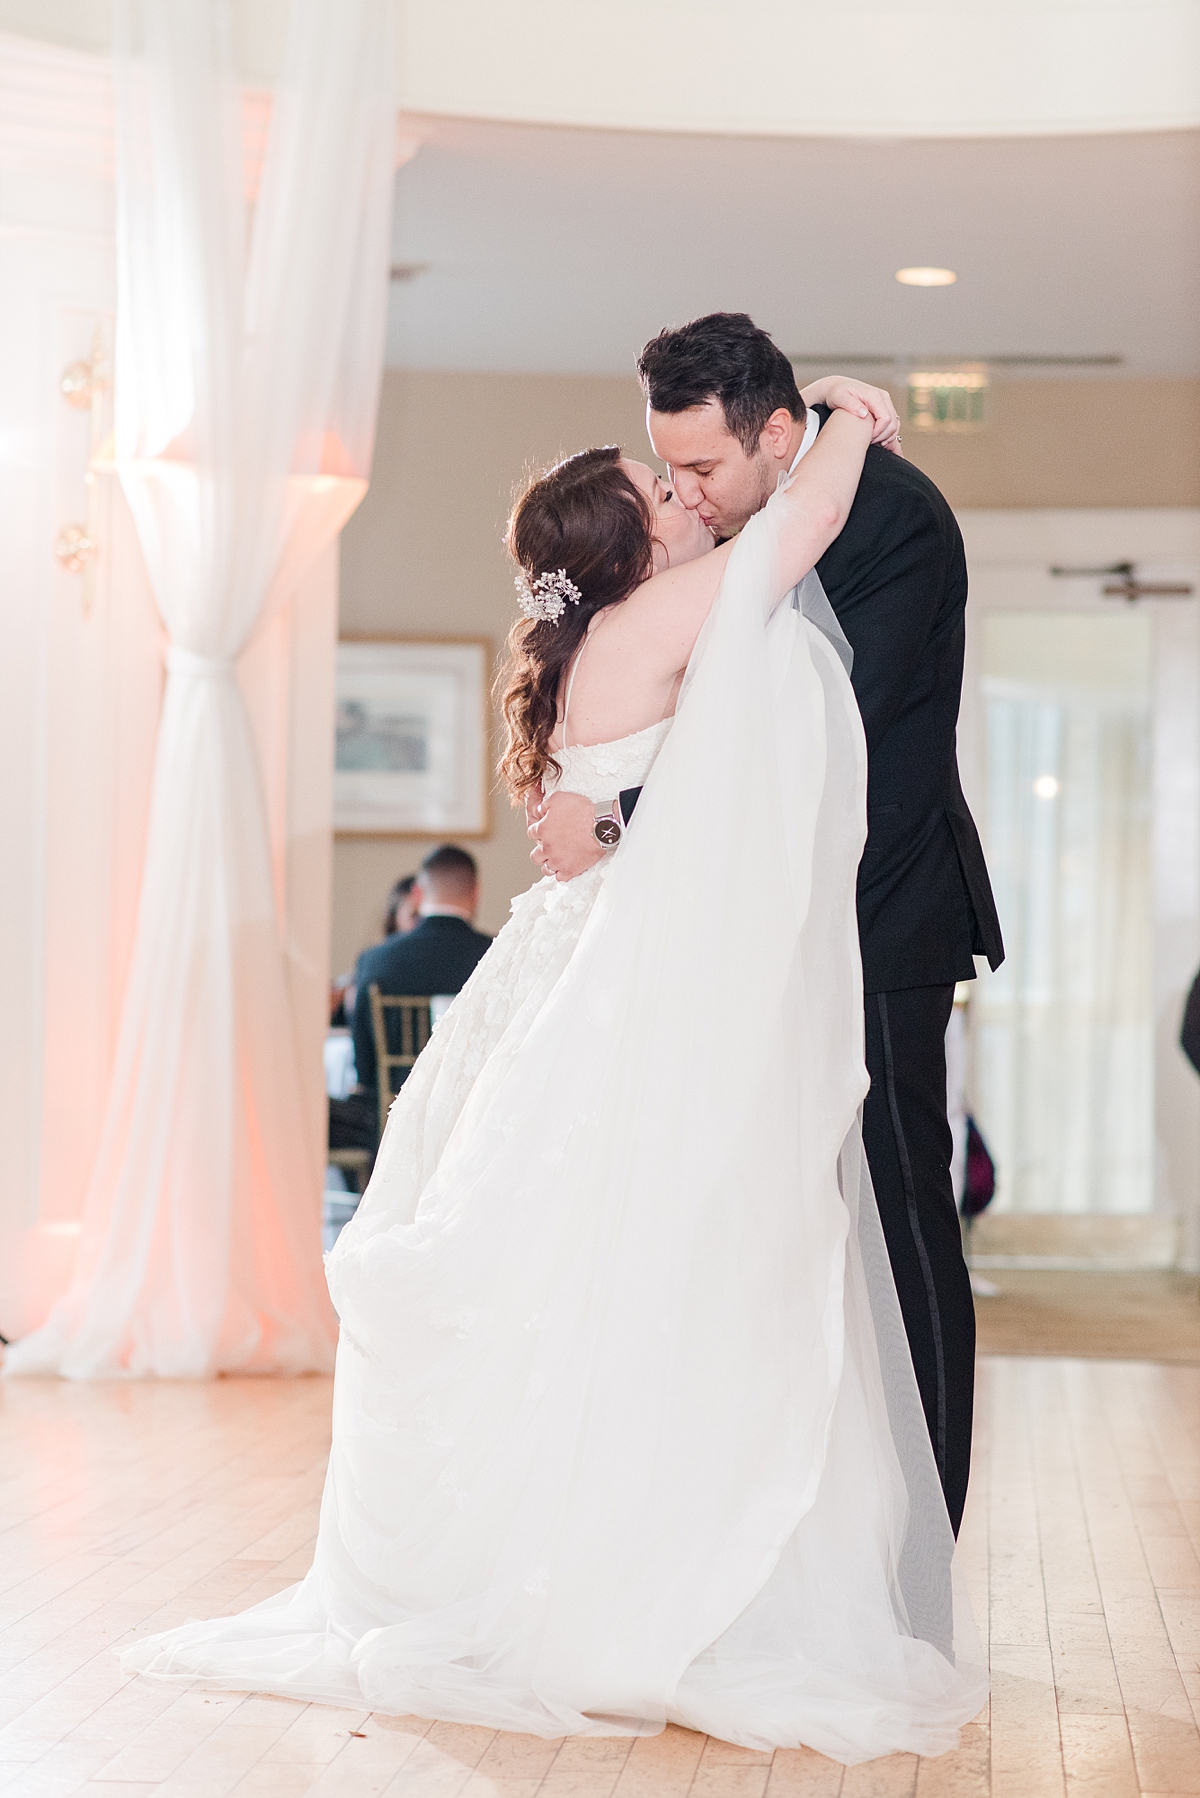 Bride and Groom First Dance at Dominion Club Fall Wedding Reception. Wedding Photography by Virginia Wedding Photographer Kailey Brianne Photography.